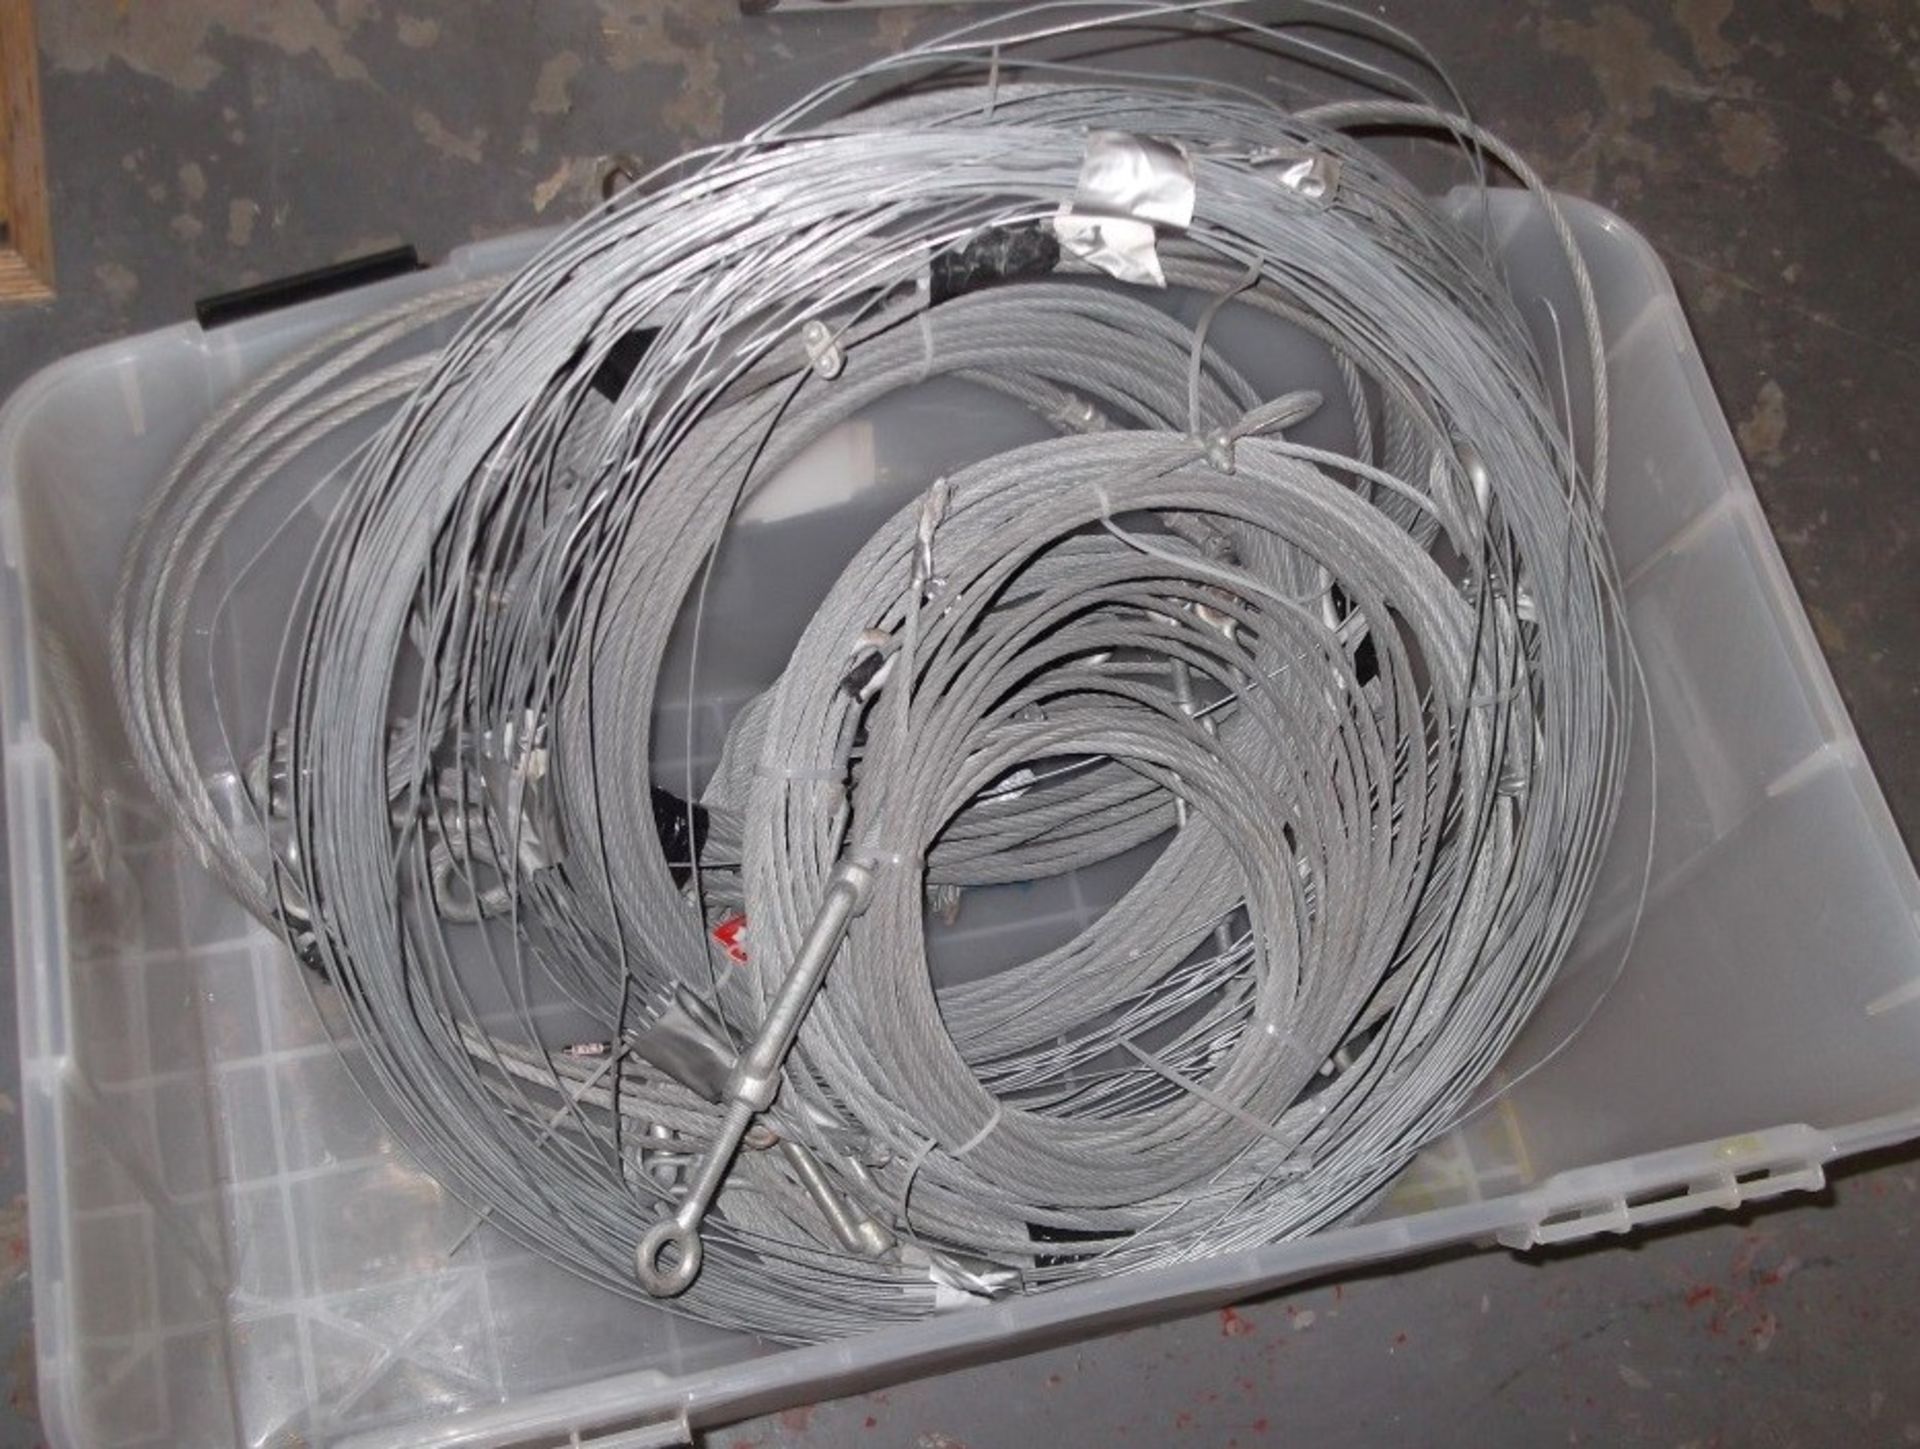 9 x Assorted Coils Of Catenary Wire - Supplied In A Variety Of Thicknesses And Lengths, Most With - Image 4 of 5